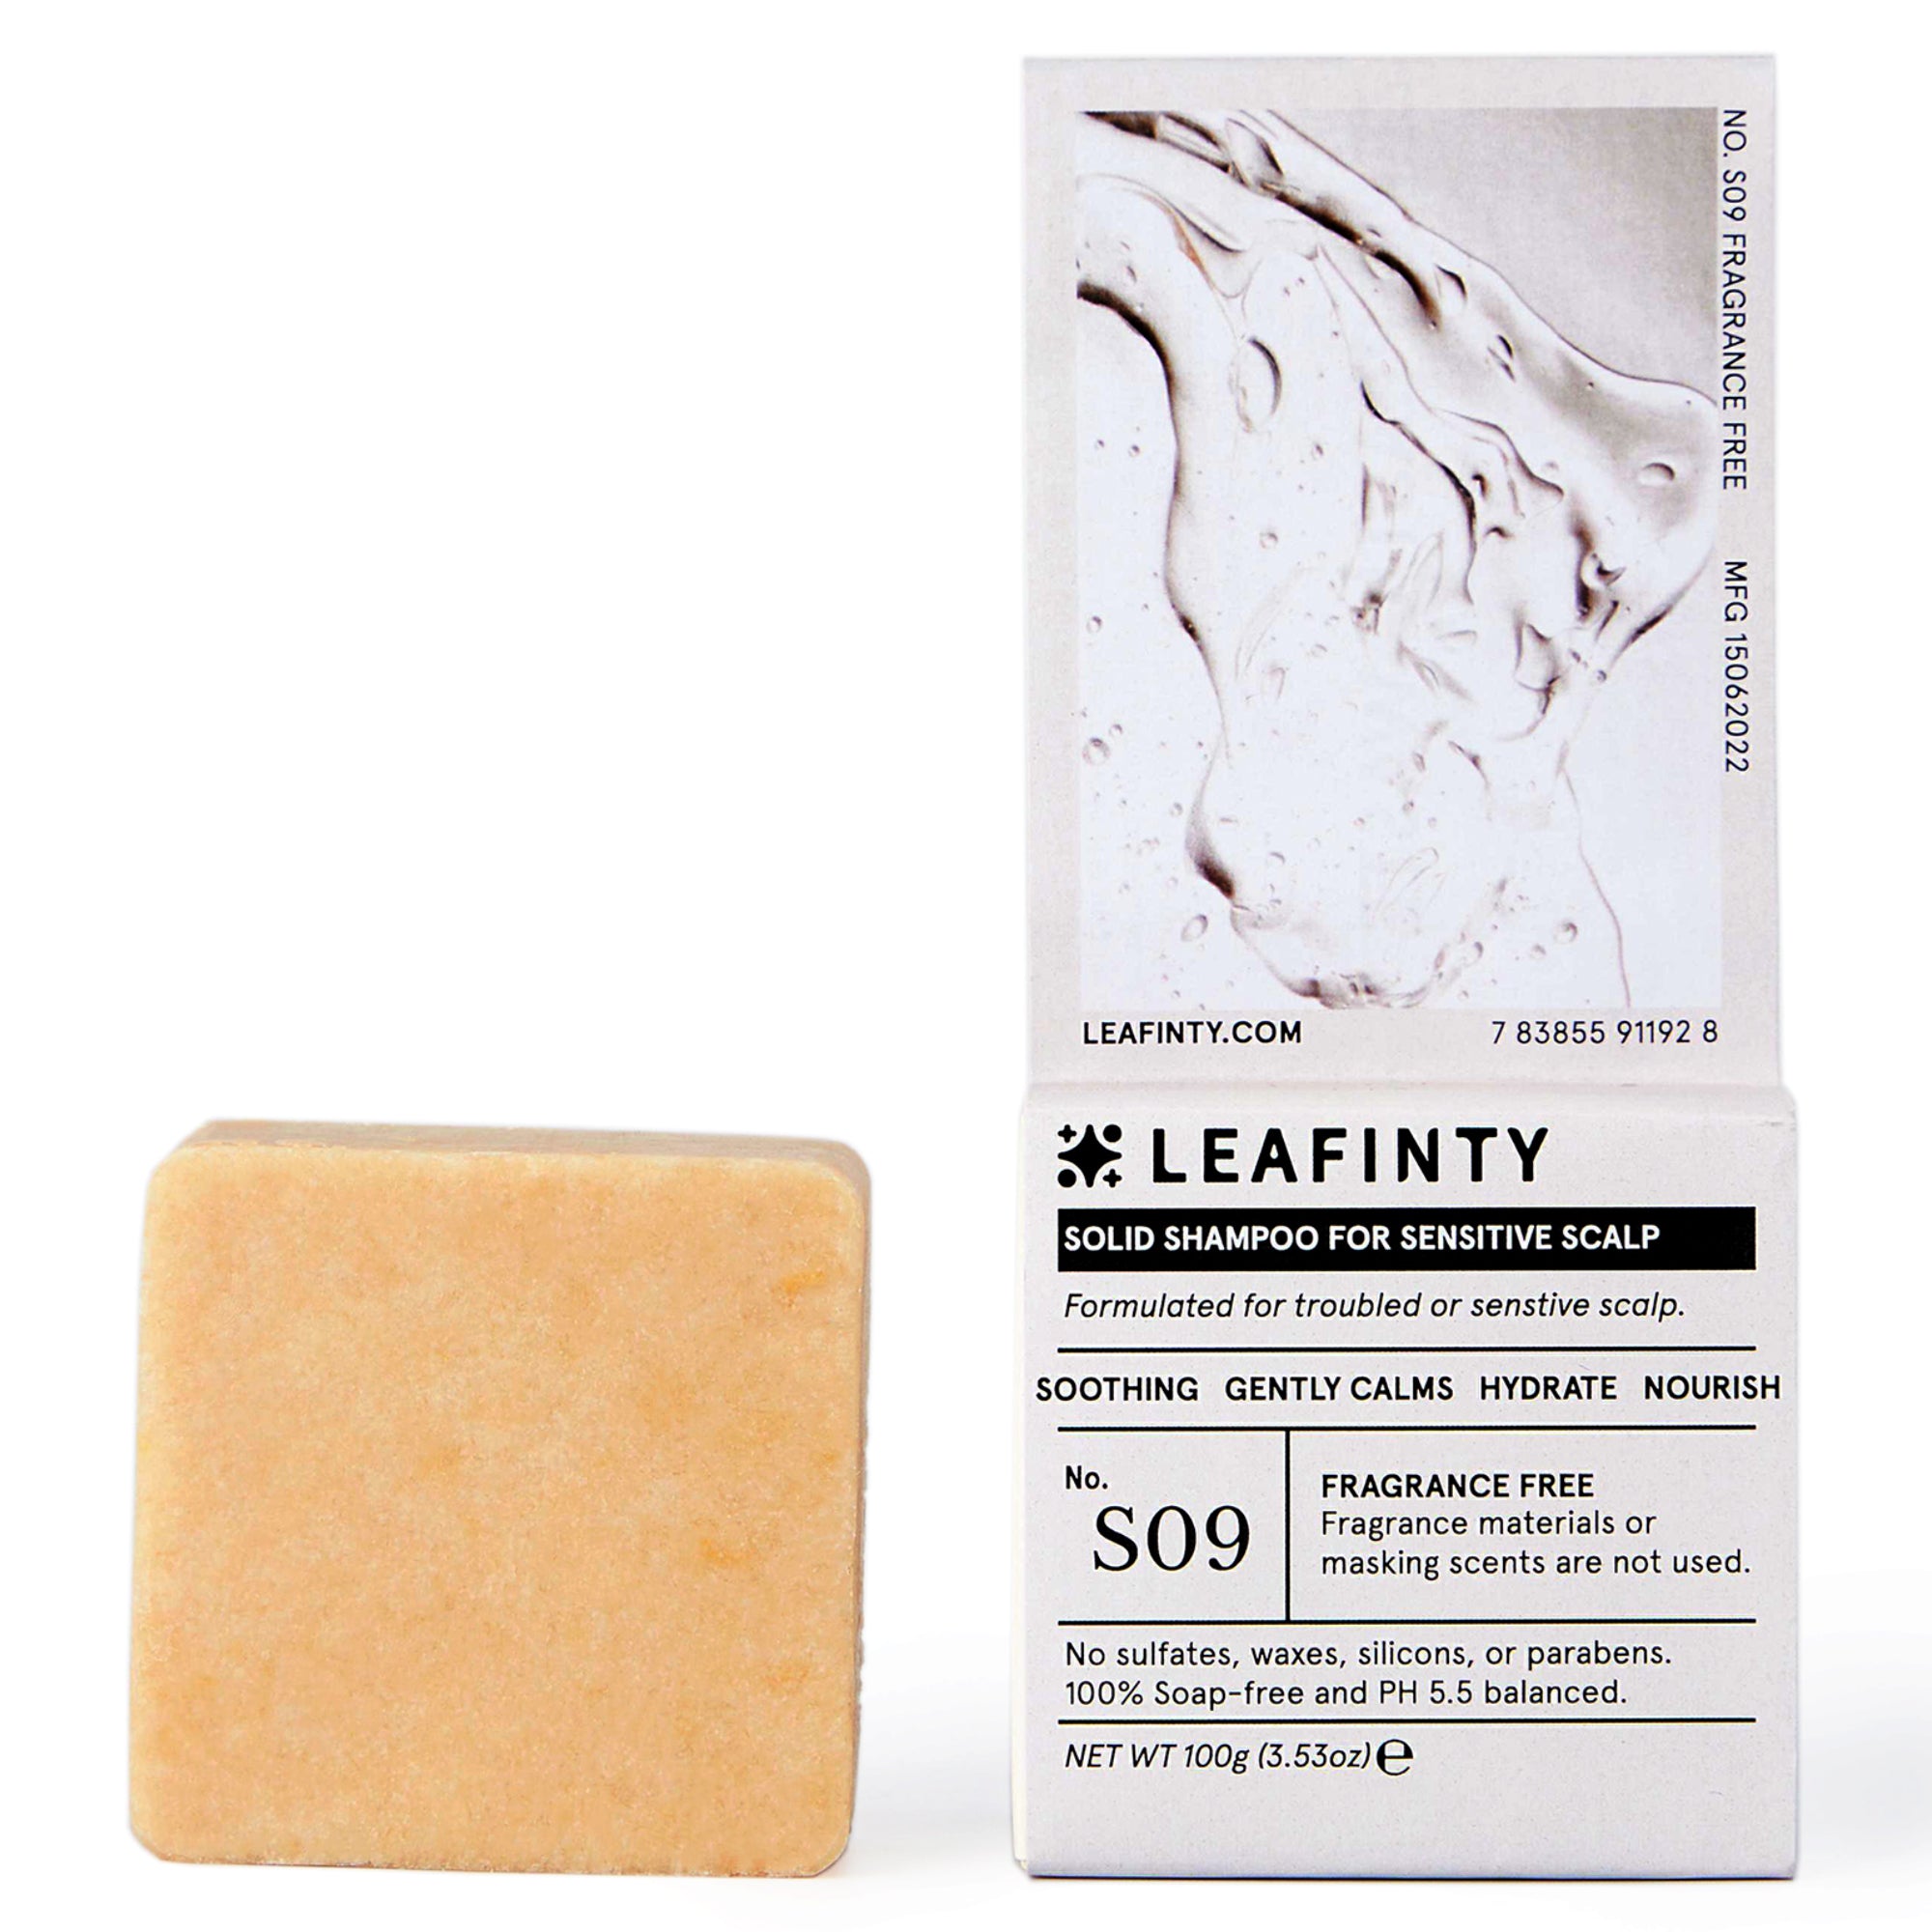 S09 Solid Shampoo Bar for Troubled or Senstive Scalp